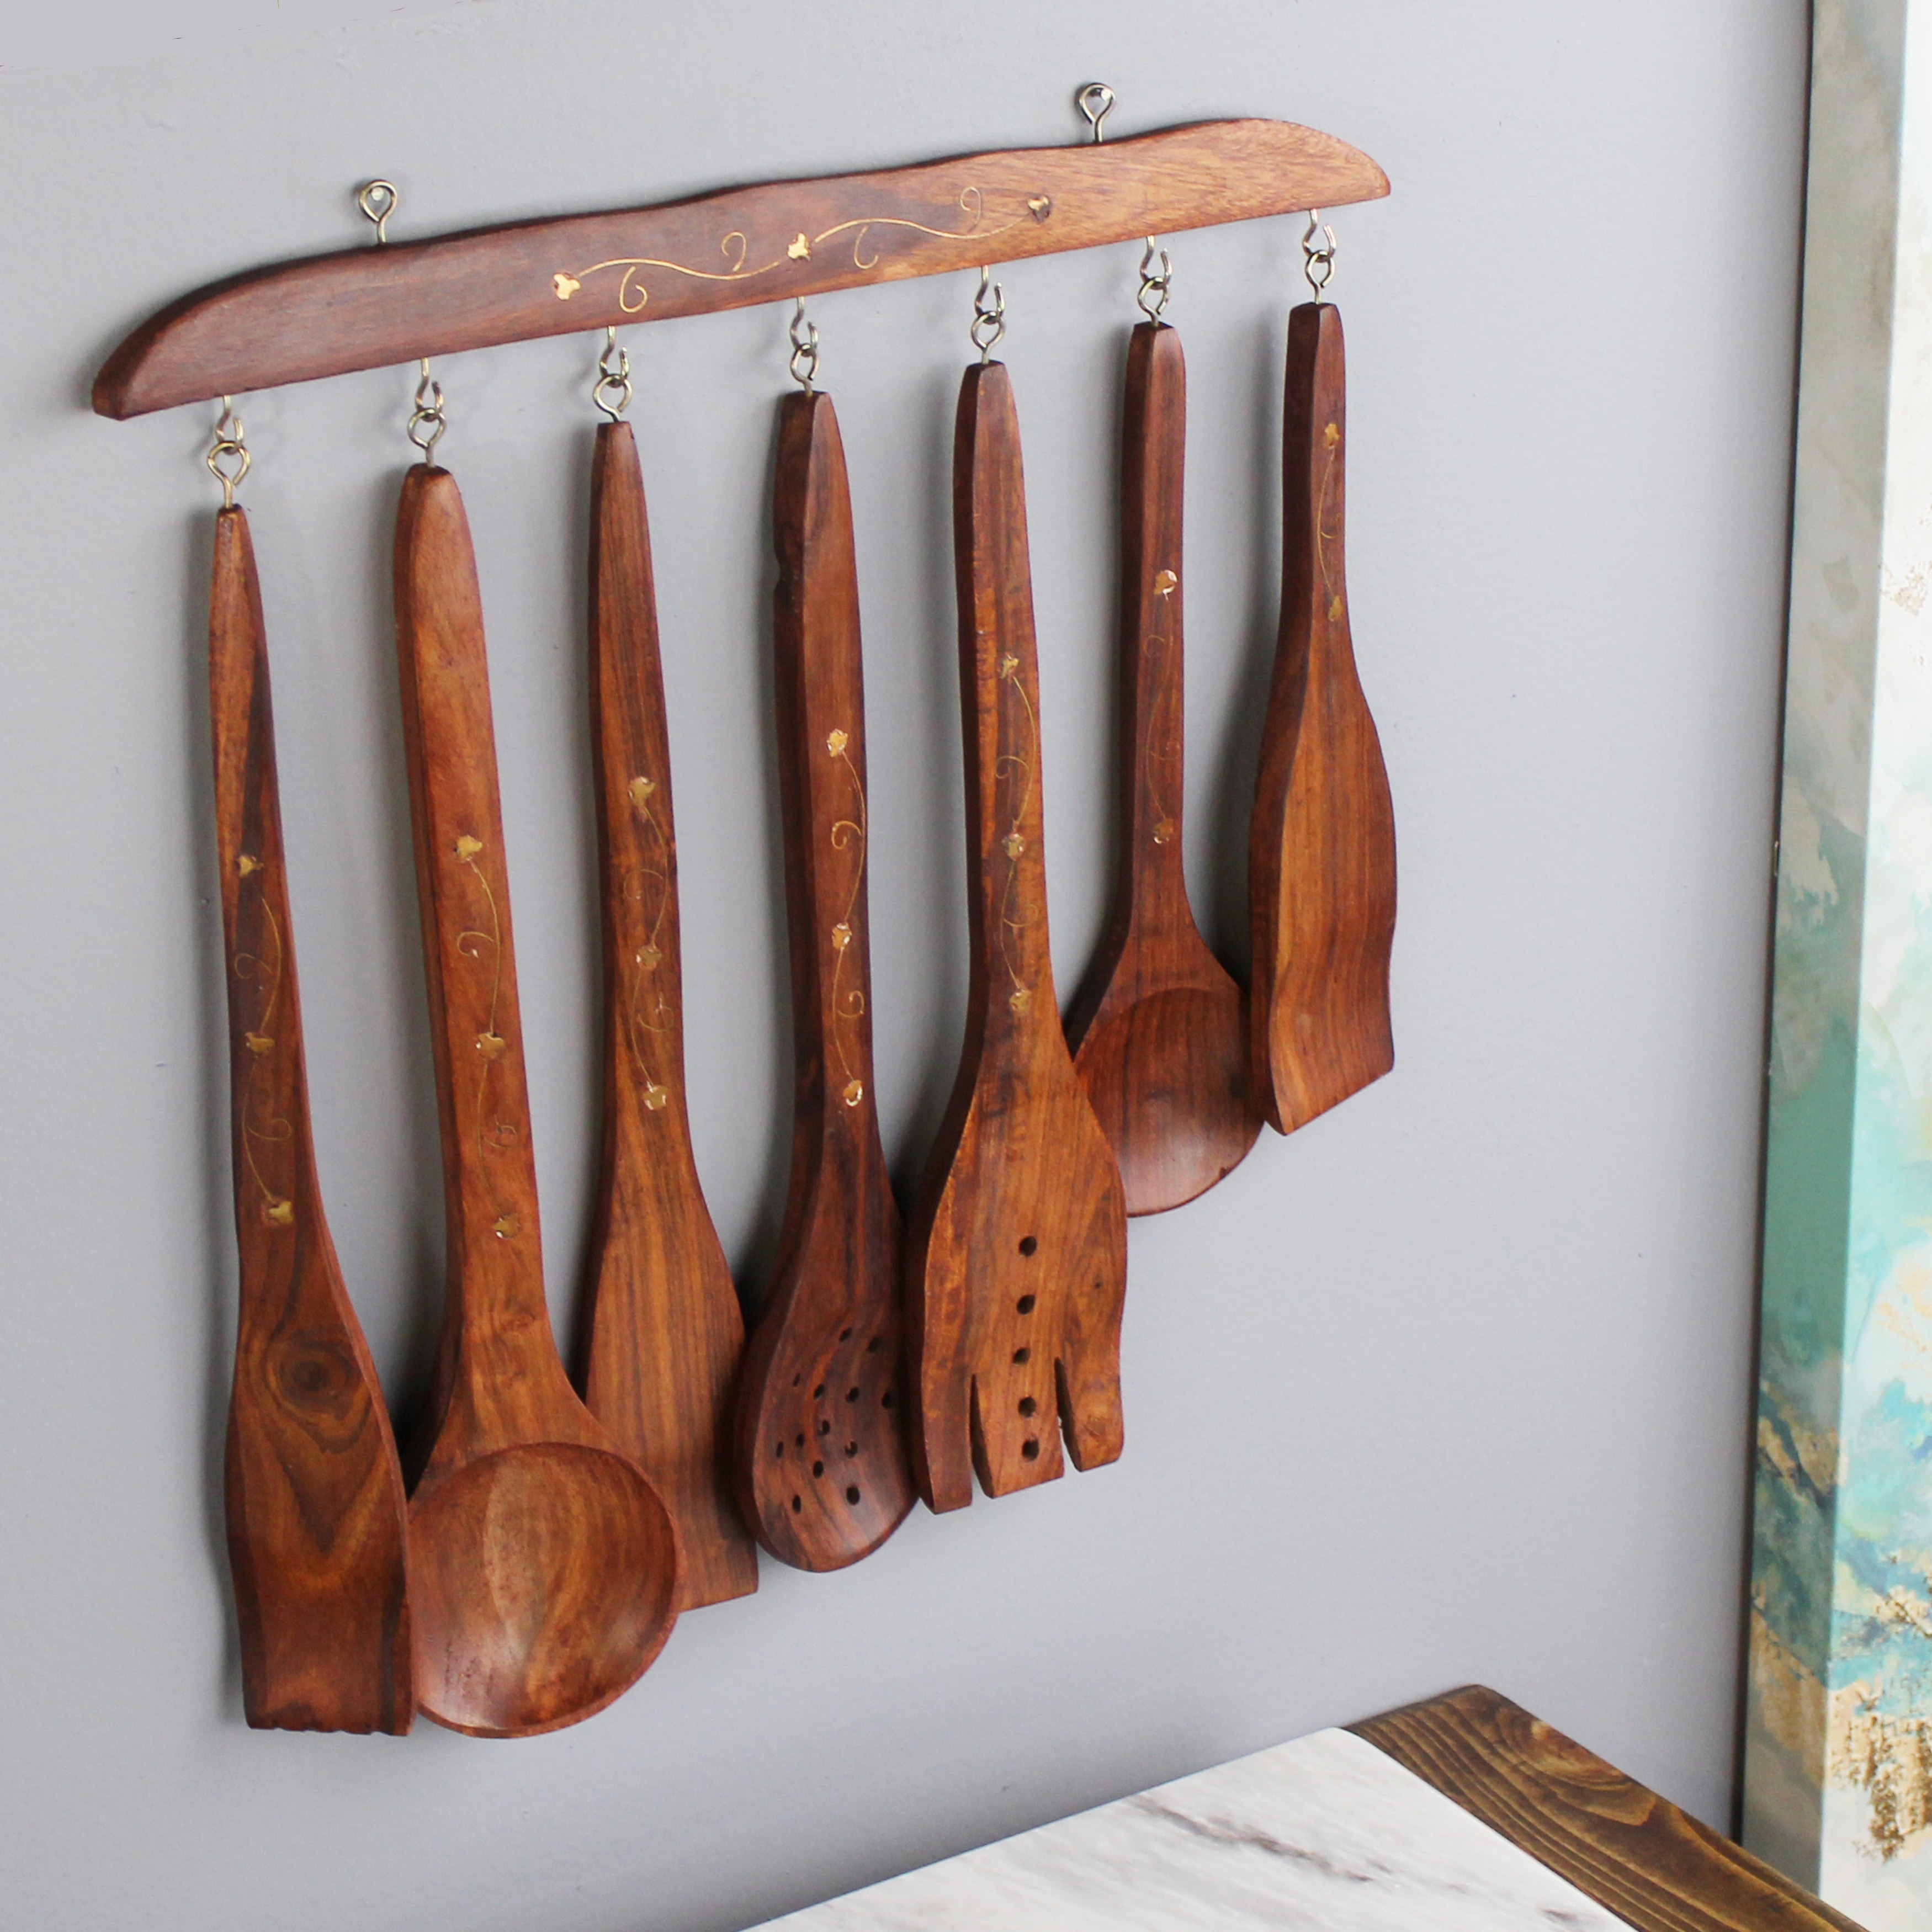 https://ak1.ostkcdn.com/images/products/is/images/direct/1debc6f8d51a7425eeb4cae36d7a7887a2dc7366/Natural-Geo-Handcarved-Decorative-Wooden-Kitchen-Spoon-Set.jpg